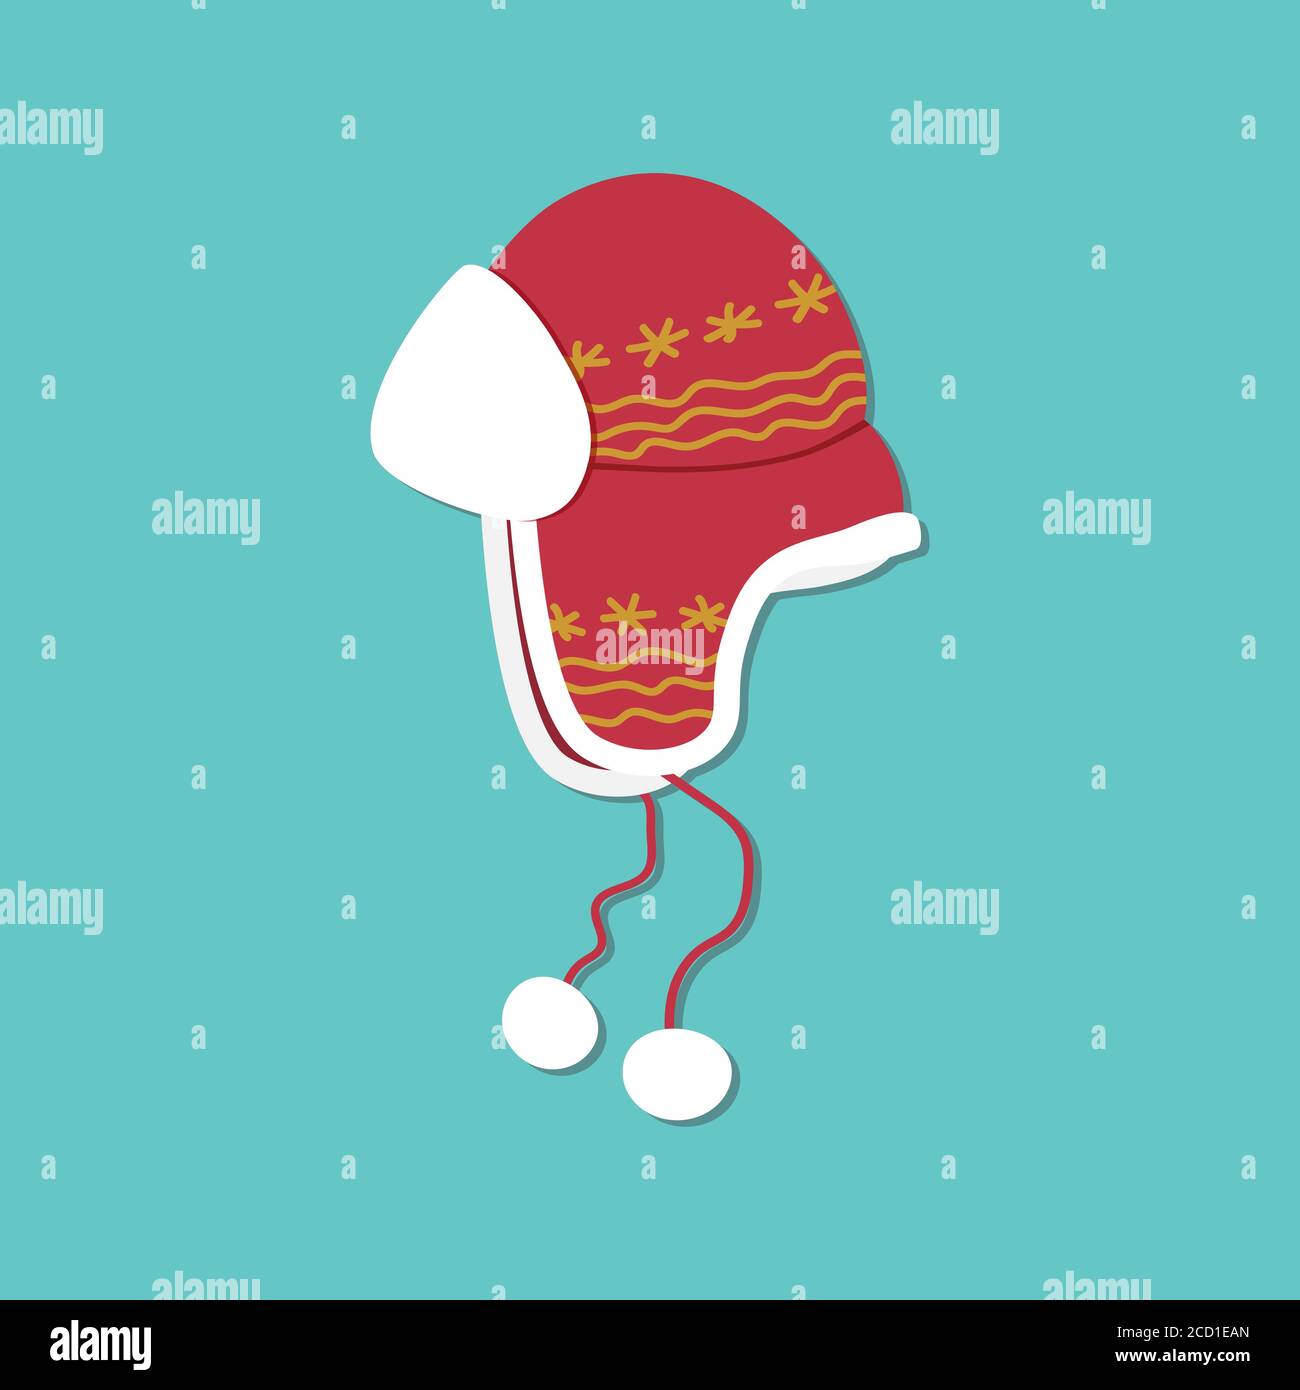 red ushanka hat with hand-drawn yellow ornament white bells on red strings on a blue background Stock Vector